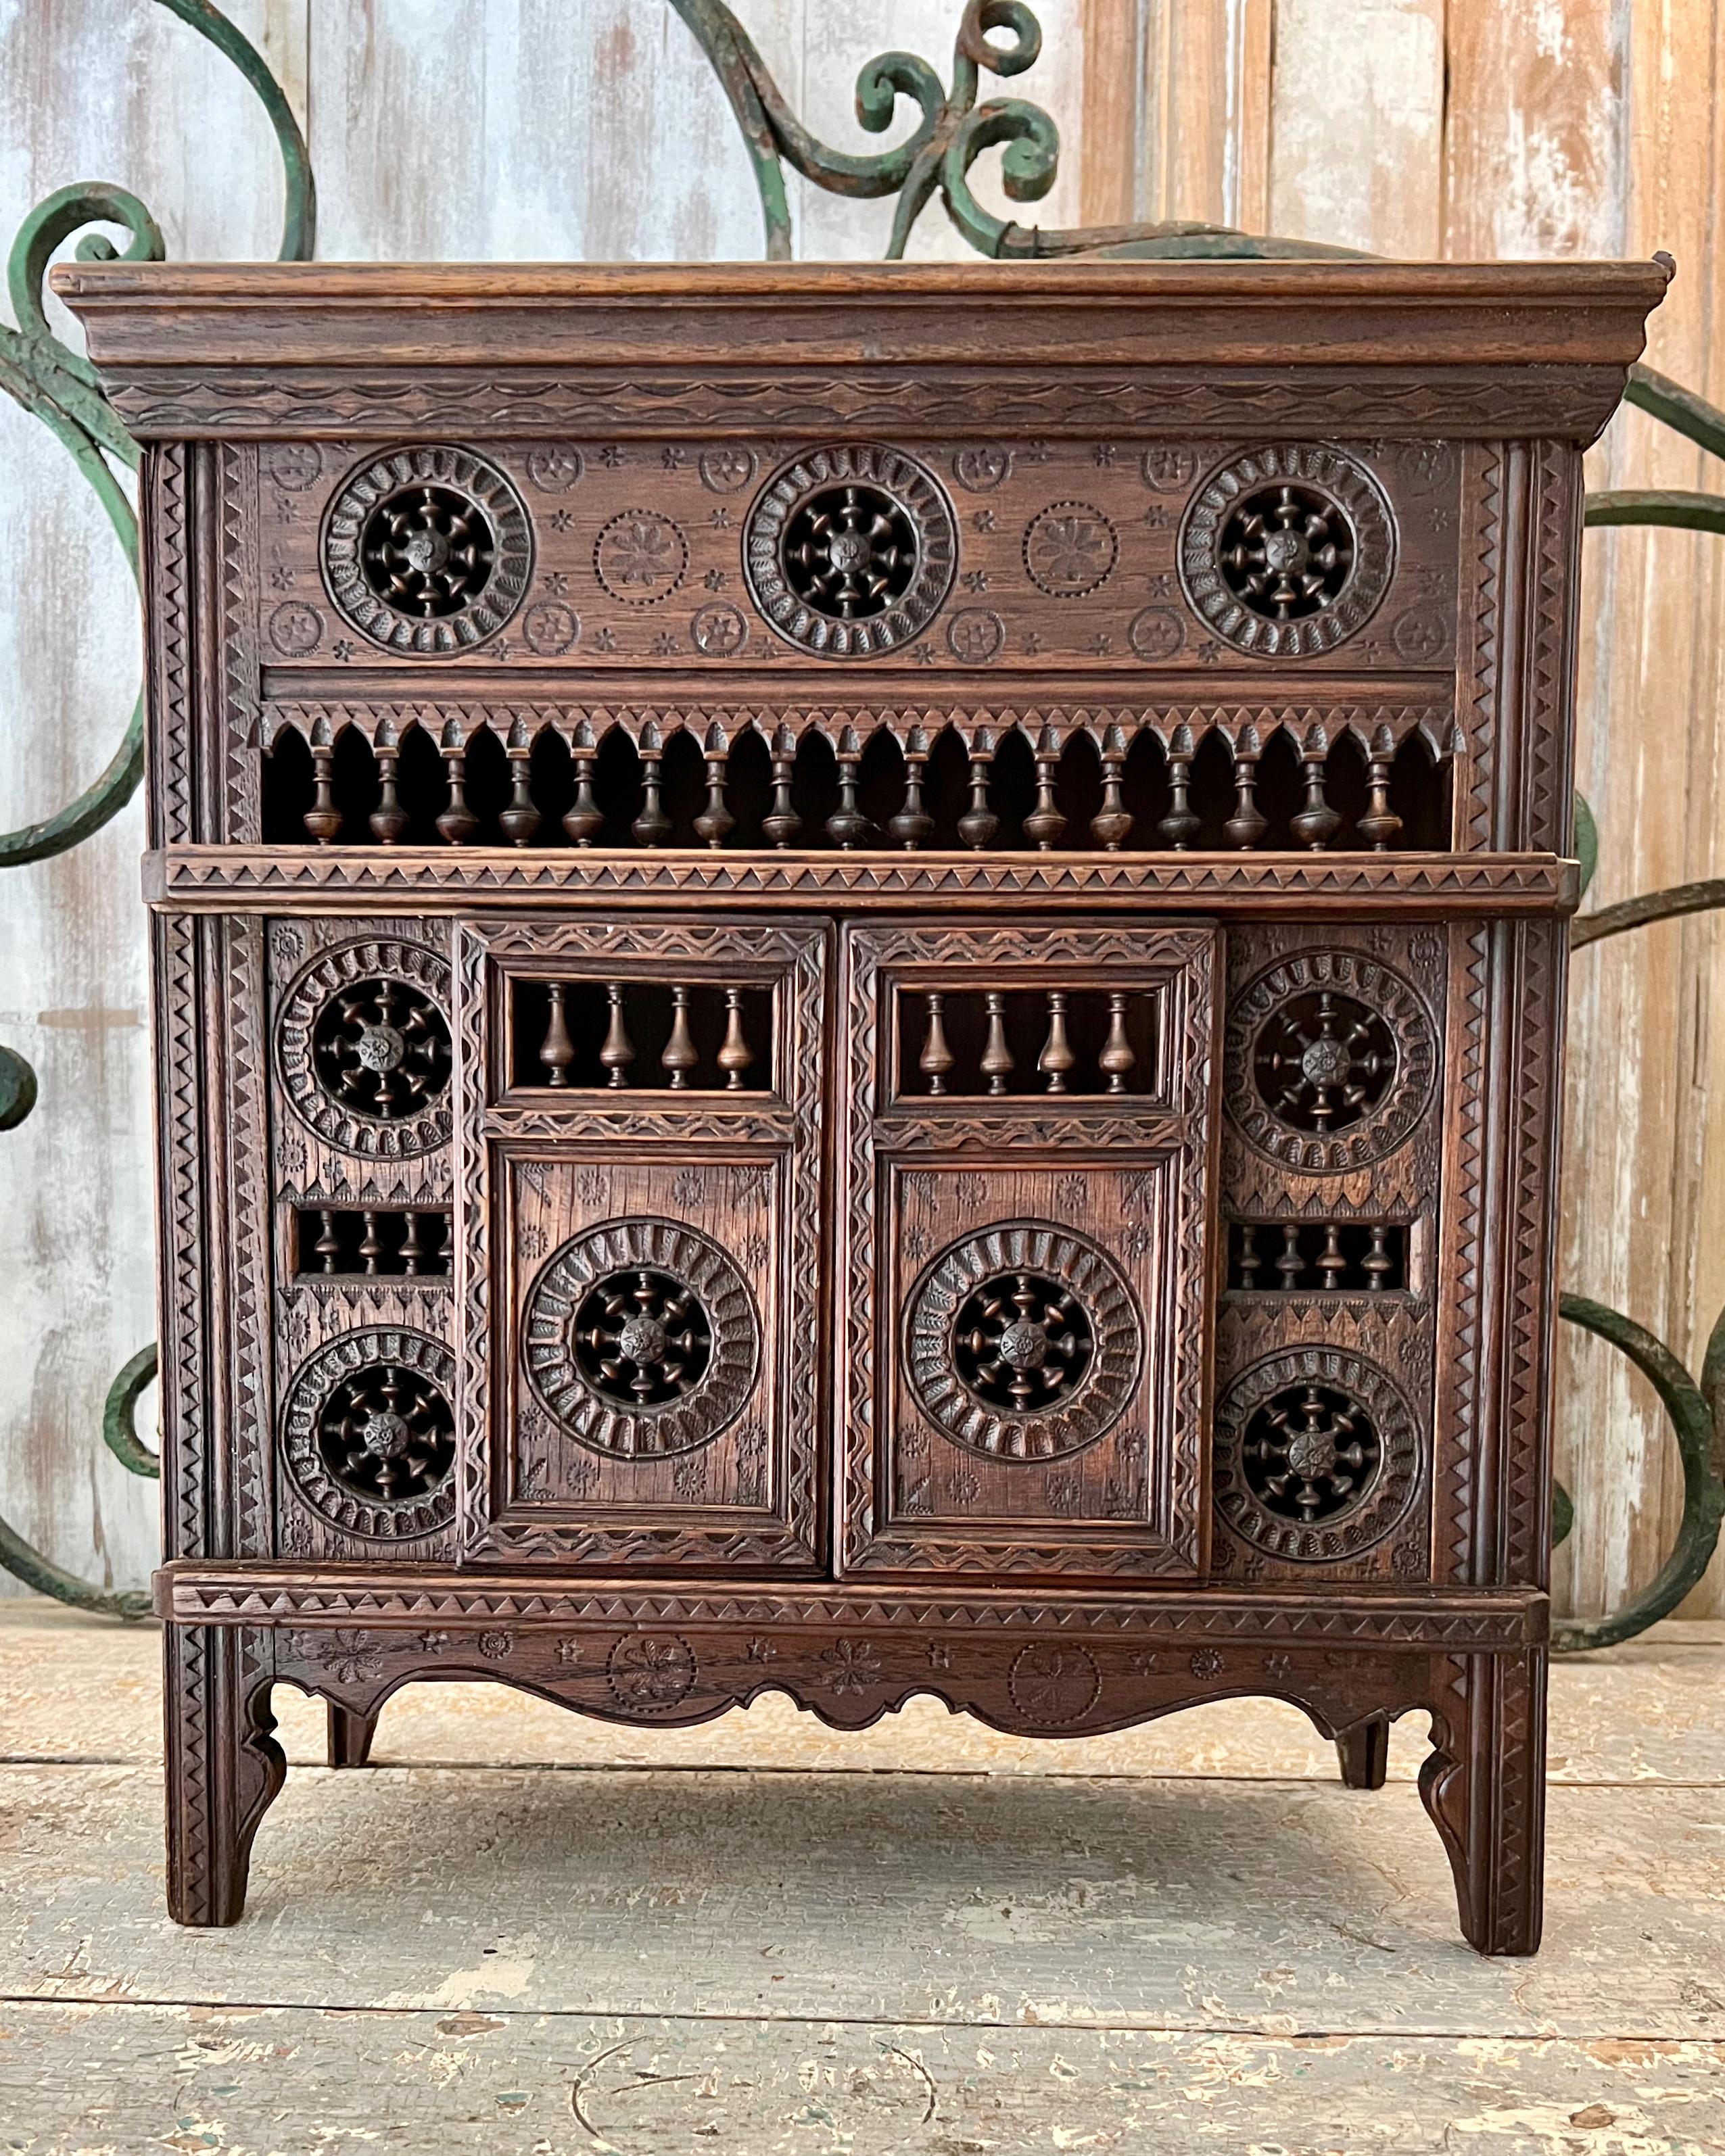 Charming antique French miniature oak Brittany cabinet with richly hand-carved details.
Brittany, France